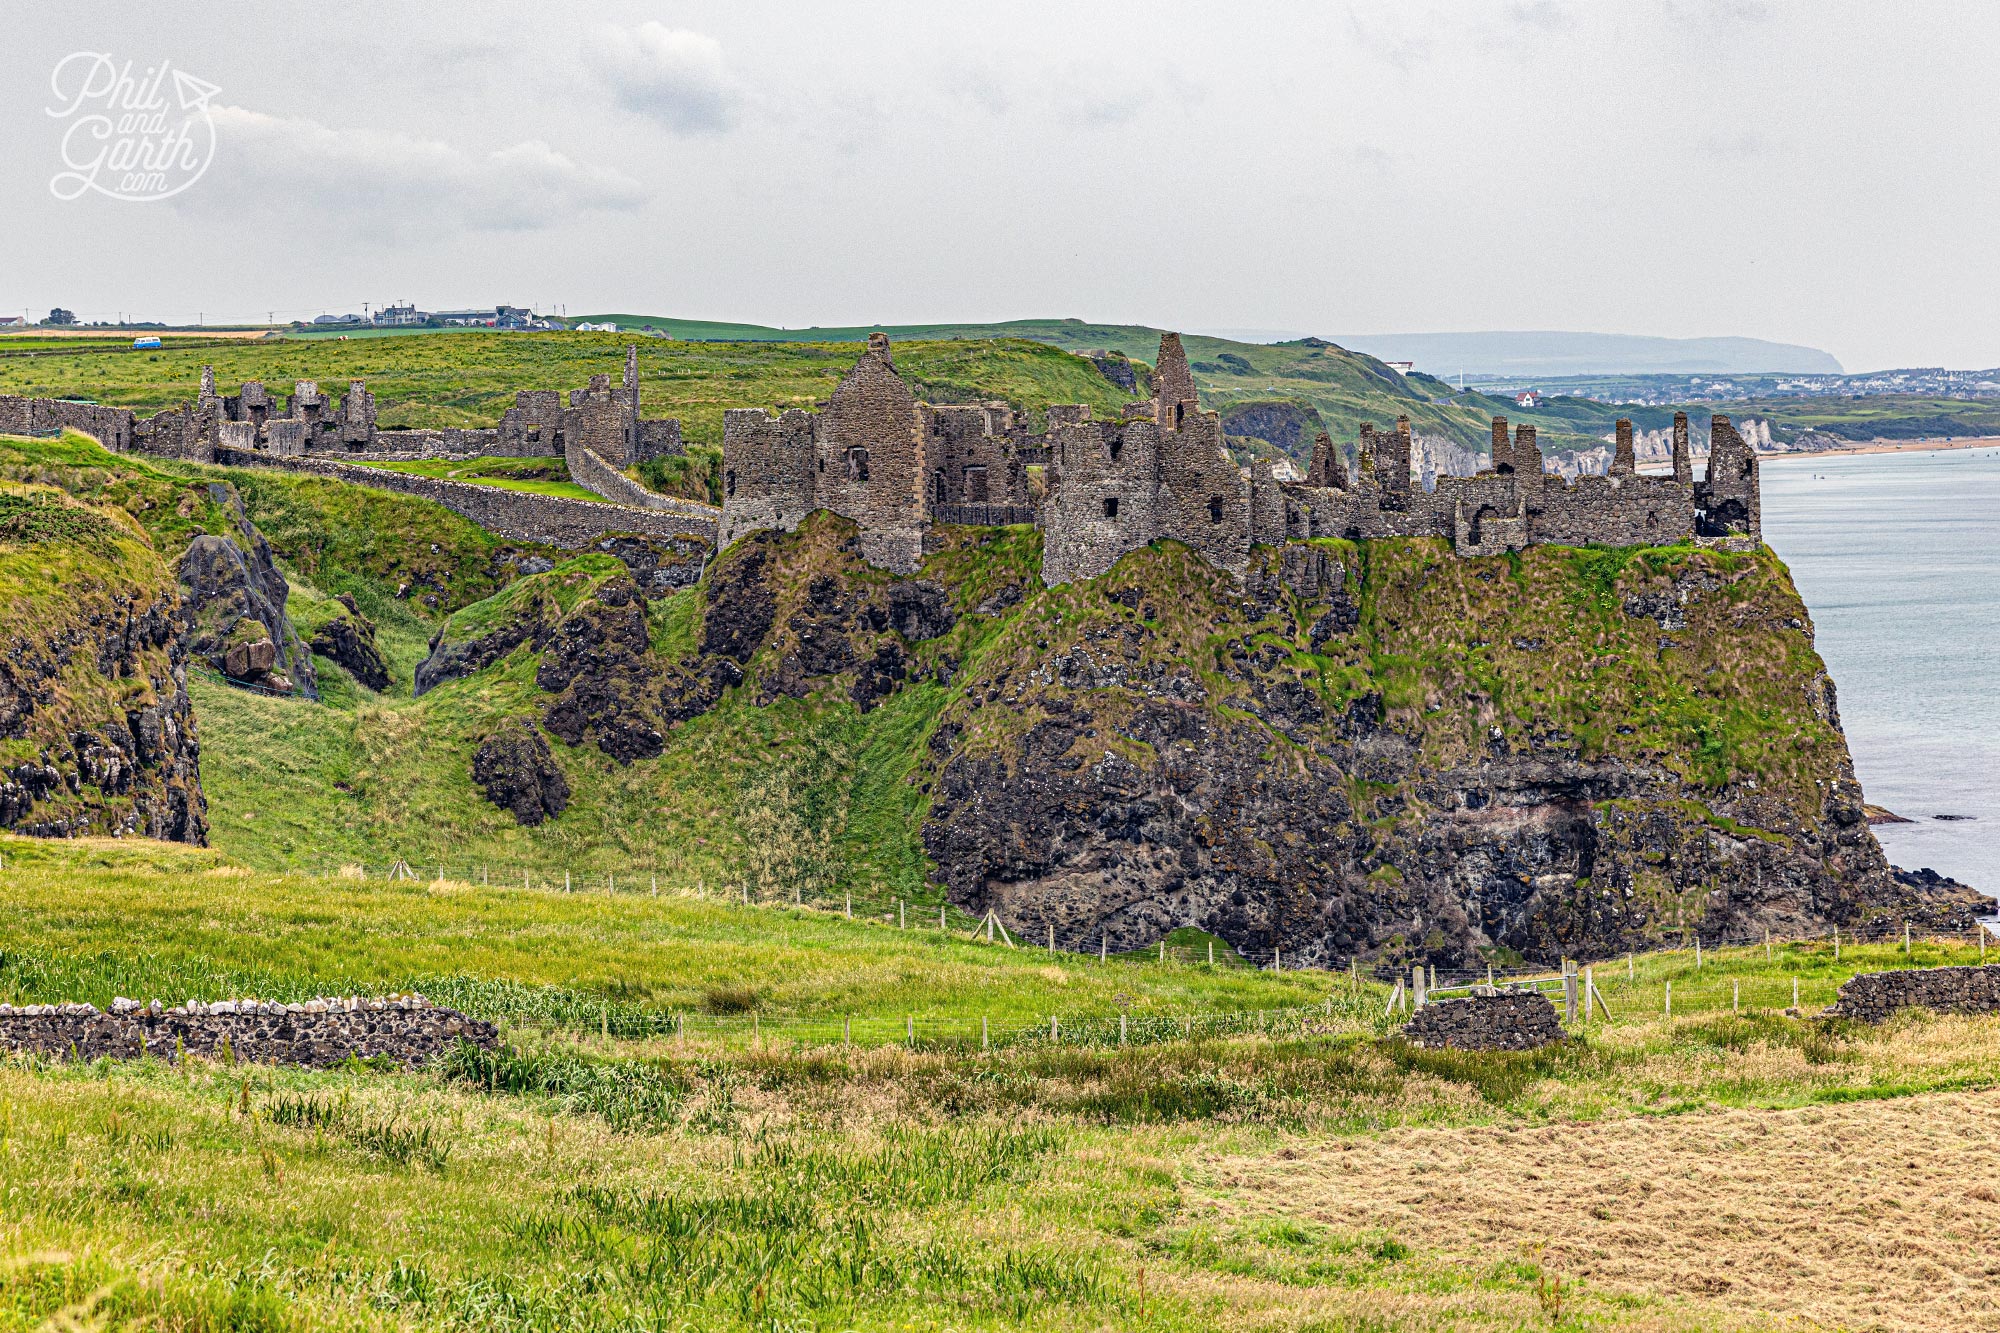 The medieval Dunluce Castle dates back to 1500